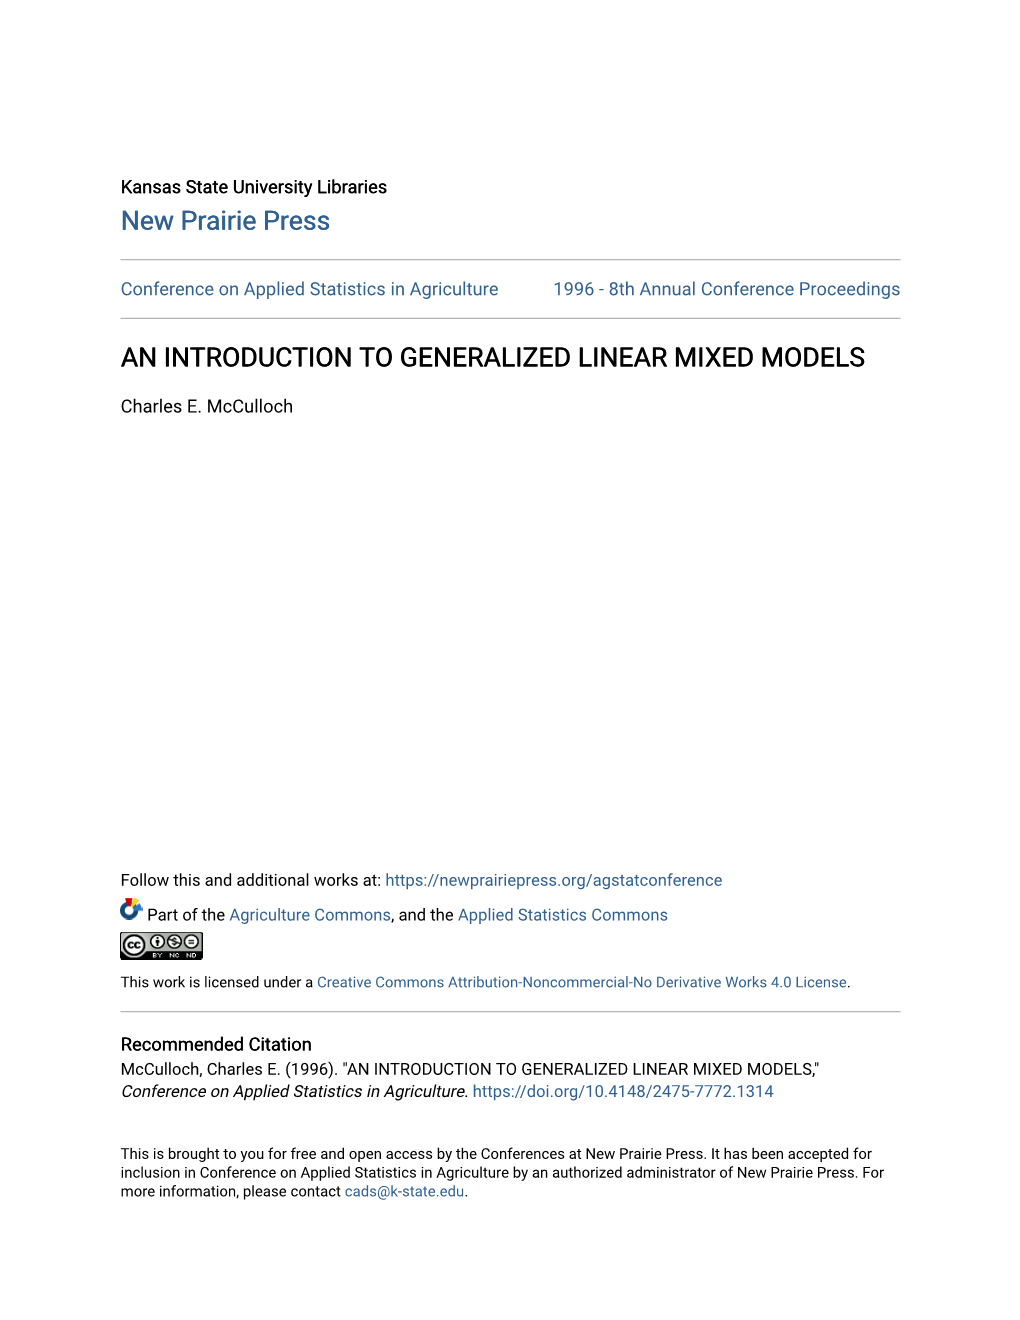 An Introduction to Generalized Linear Mixed Models